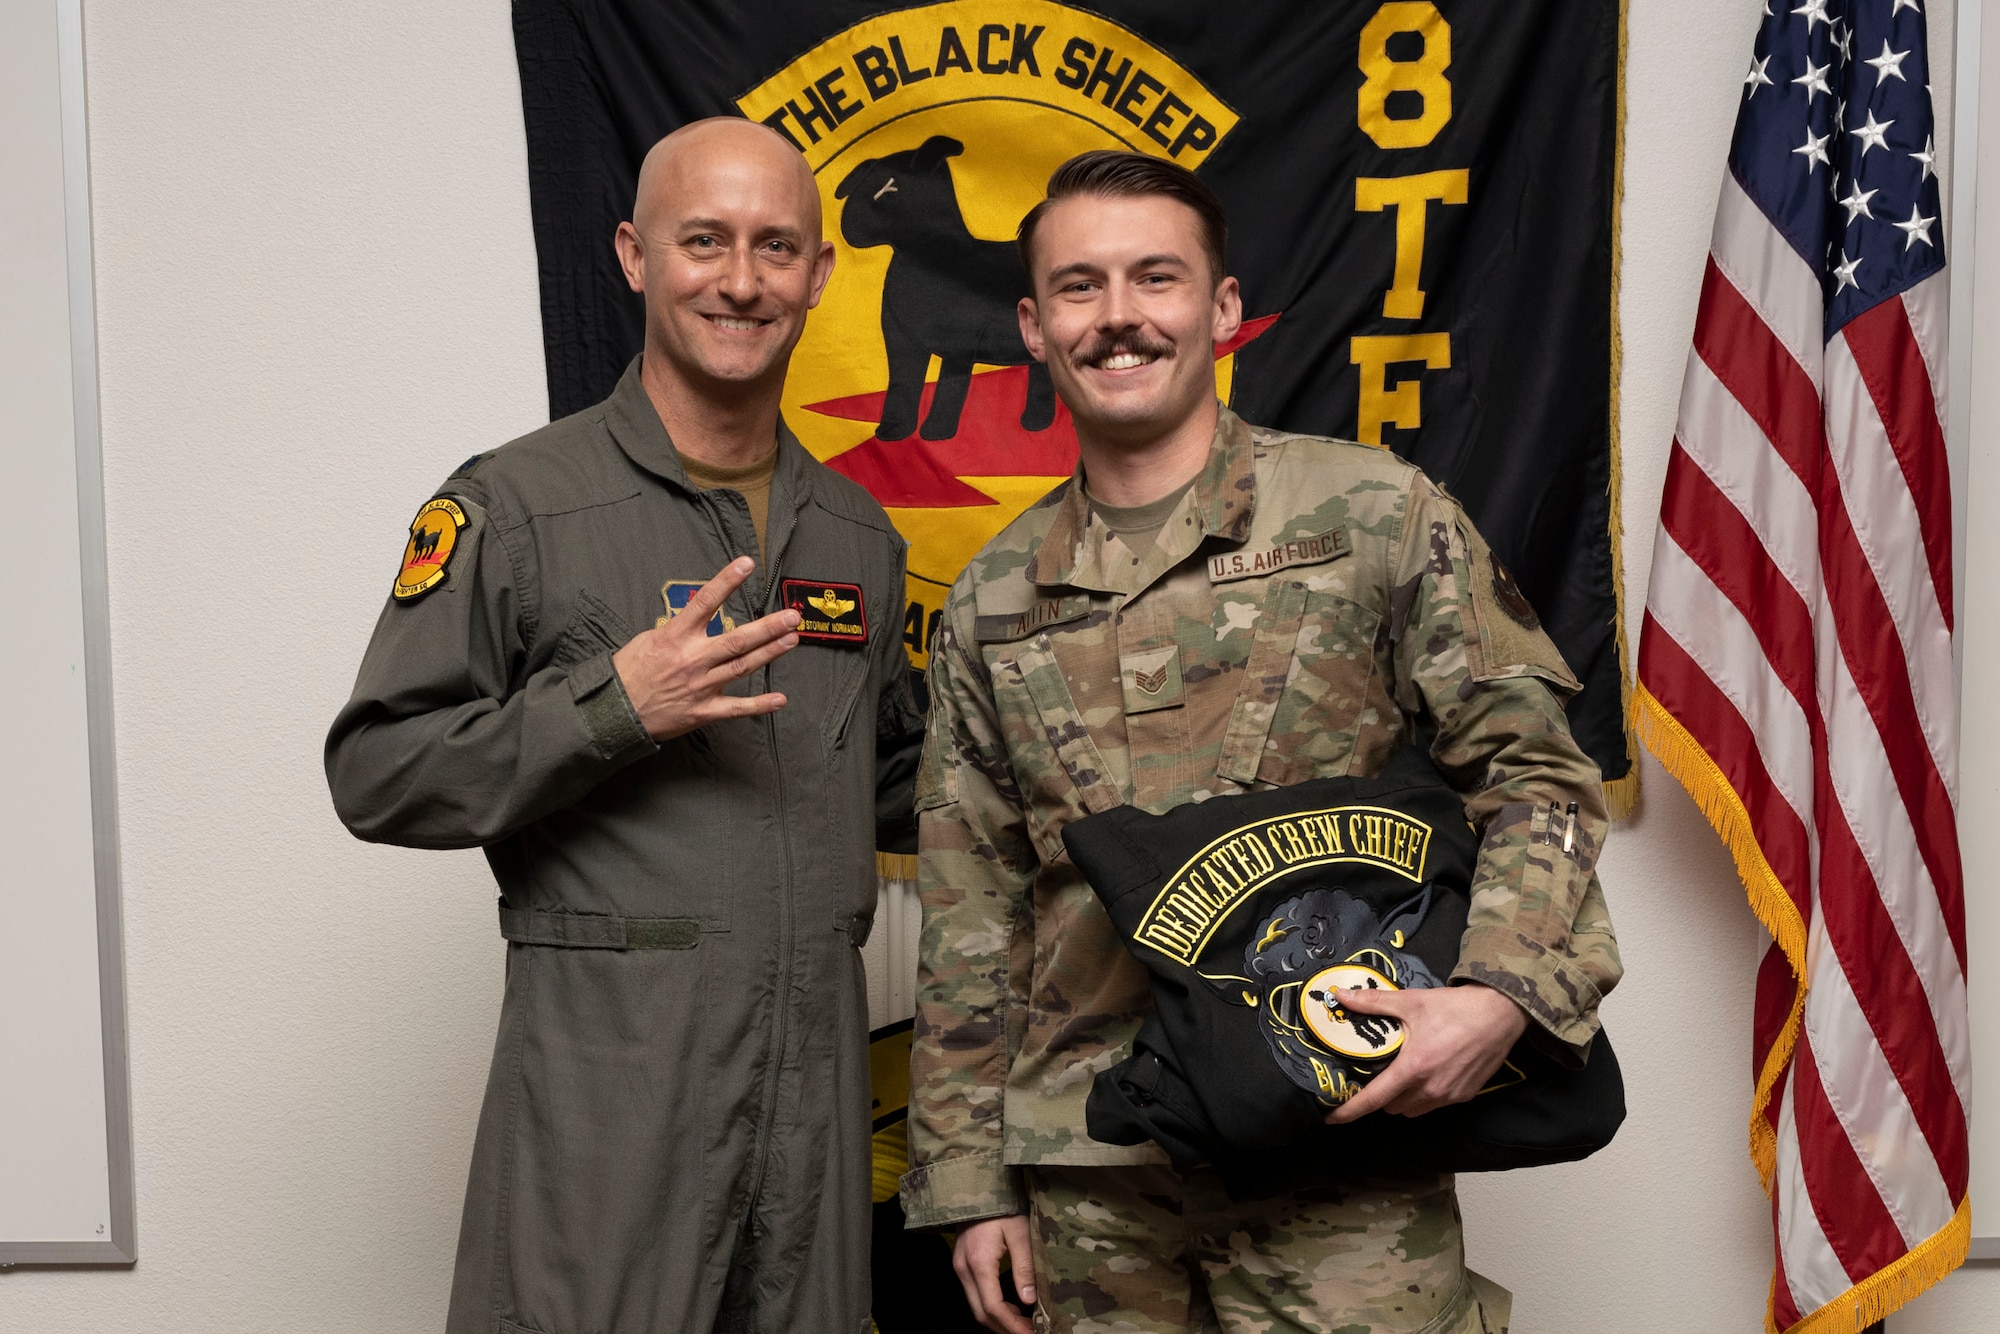 U.S. Air Force Staff Sgt. Alec Allen, 8th Aircraft Maintenance Unit crew chief, right, poses for a photo with U.S. Air Force Lt. Col. George Normandin, 8th Fighter Squadron commander, during a Dedicated Crew Chief Appointment ceremony at Holloman Air Force Base, New Mexico, Jan. 3, 2022. To receive the title of DCC, a crew chief must demonstrate a history of superior performance in their career, comply with all safety practices and complete all required training. (U.S. Air Force photo by Senior Airman Antonio Salfran)